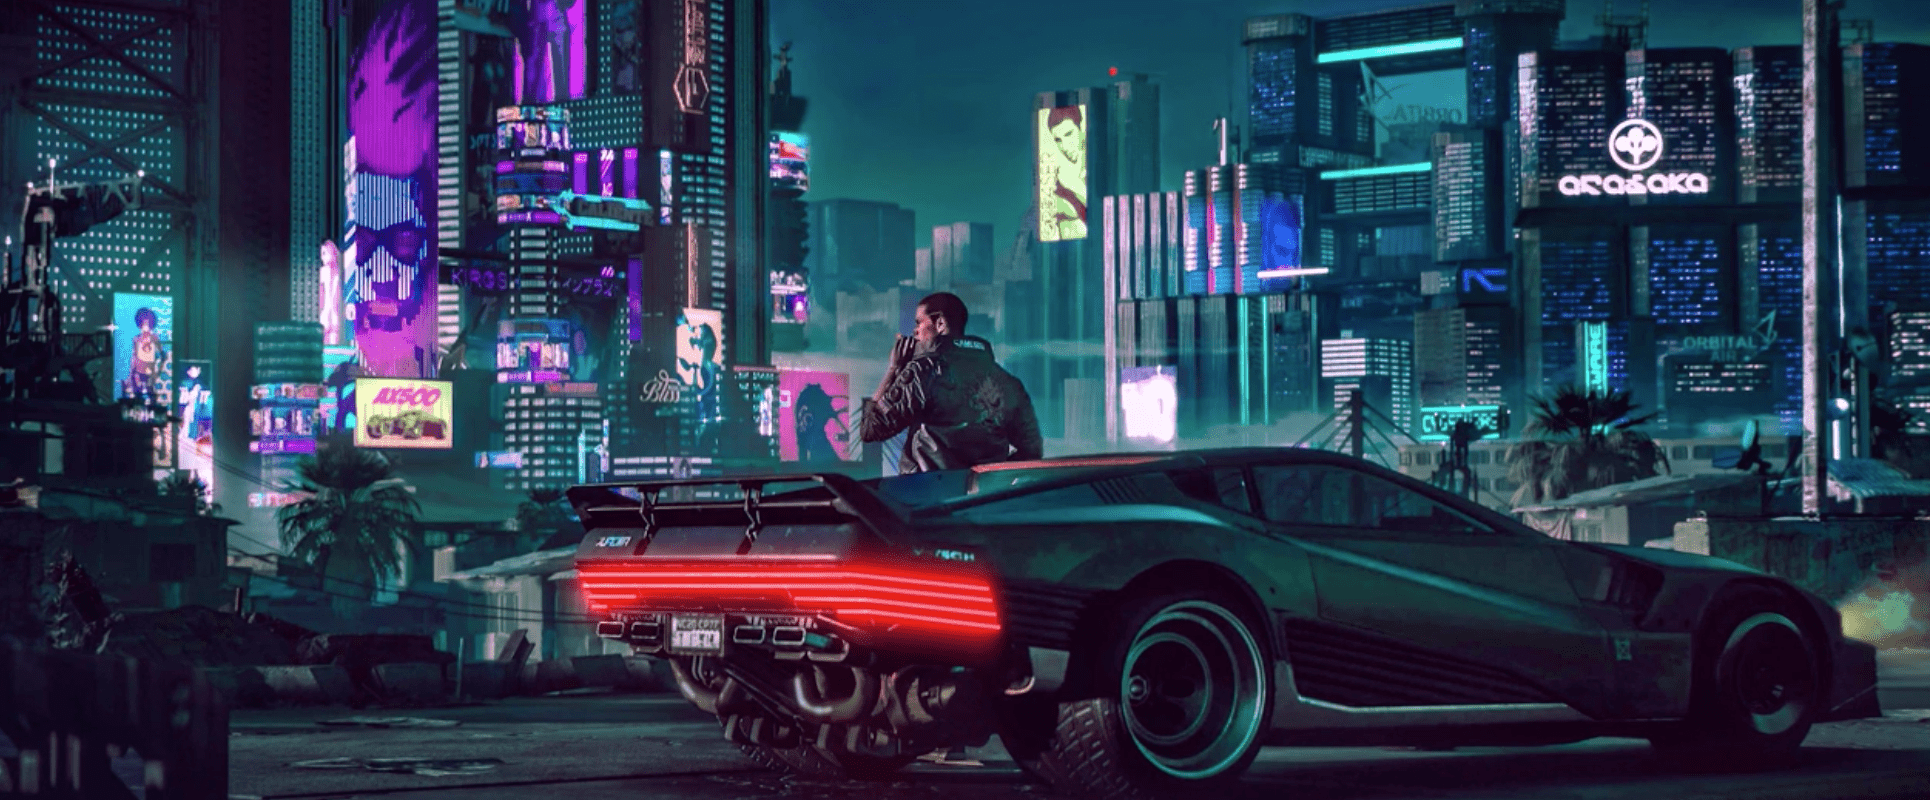 A man in the future is standing next to his car - Cyberpunk